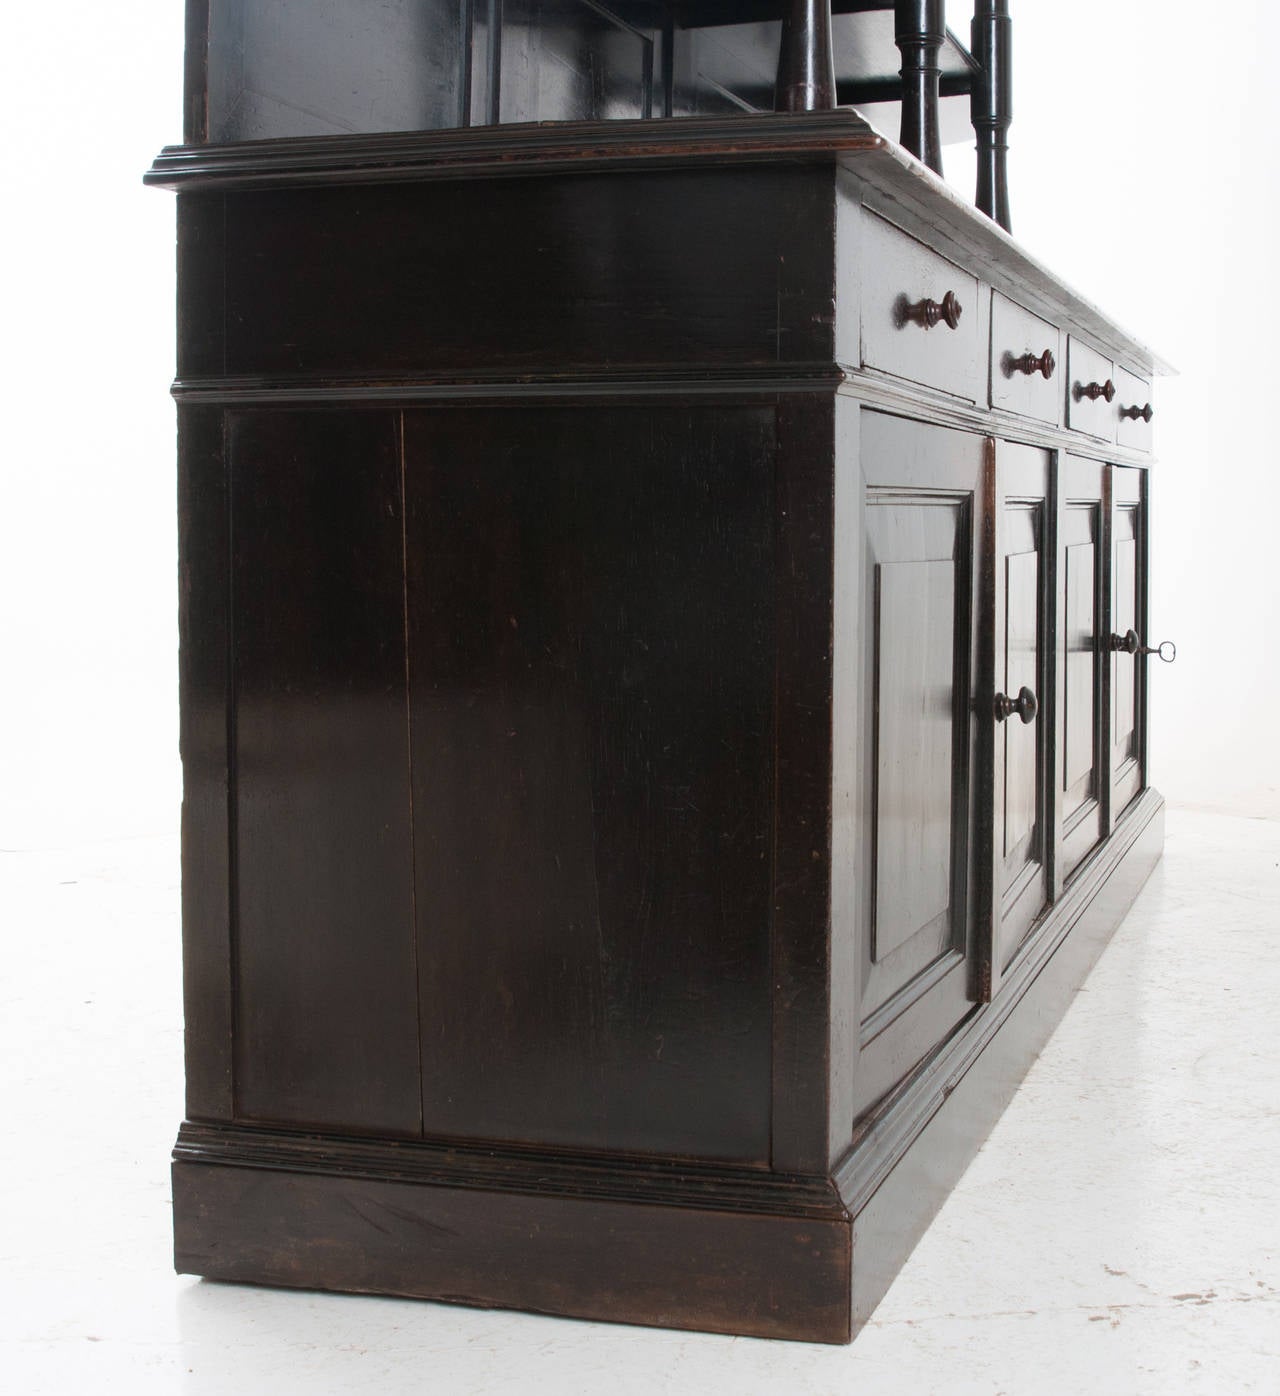 A breathtaking Art Deco 1920s bar back from a restaurant or bistro in painted black mahogany. The three turned mahogany center styles make this fine bar outstanding. We love the paneled back of the shelves with the scalloped sides. The enfilade base